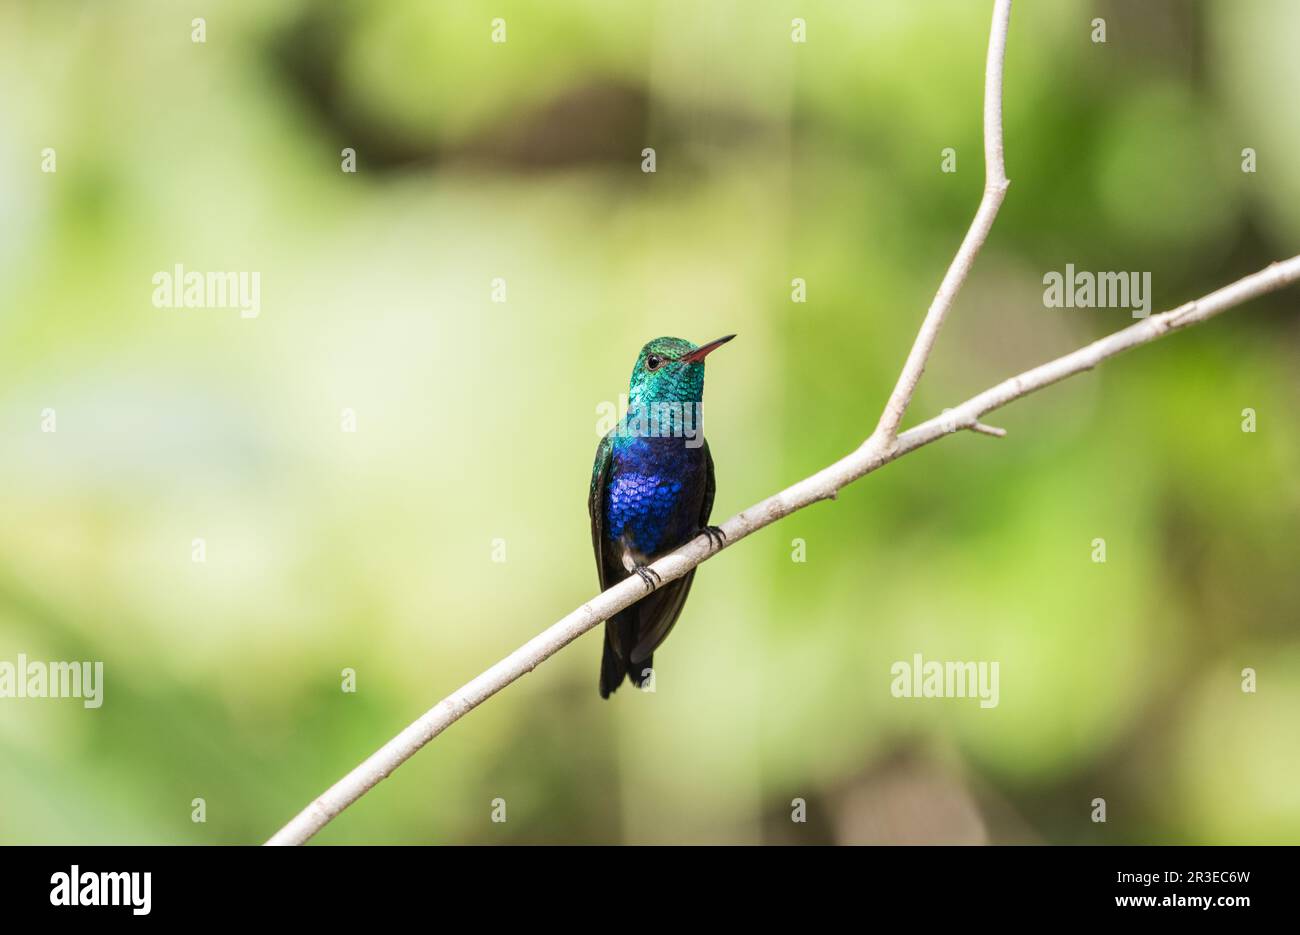 Perched Violet-bellied Hummingbird (Chlorestes julie) in Panama Stock Photo